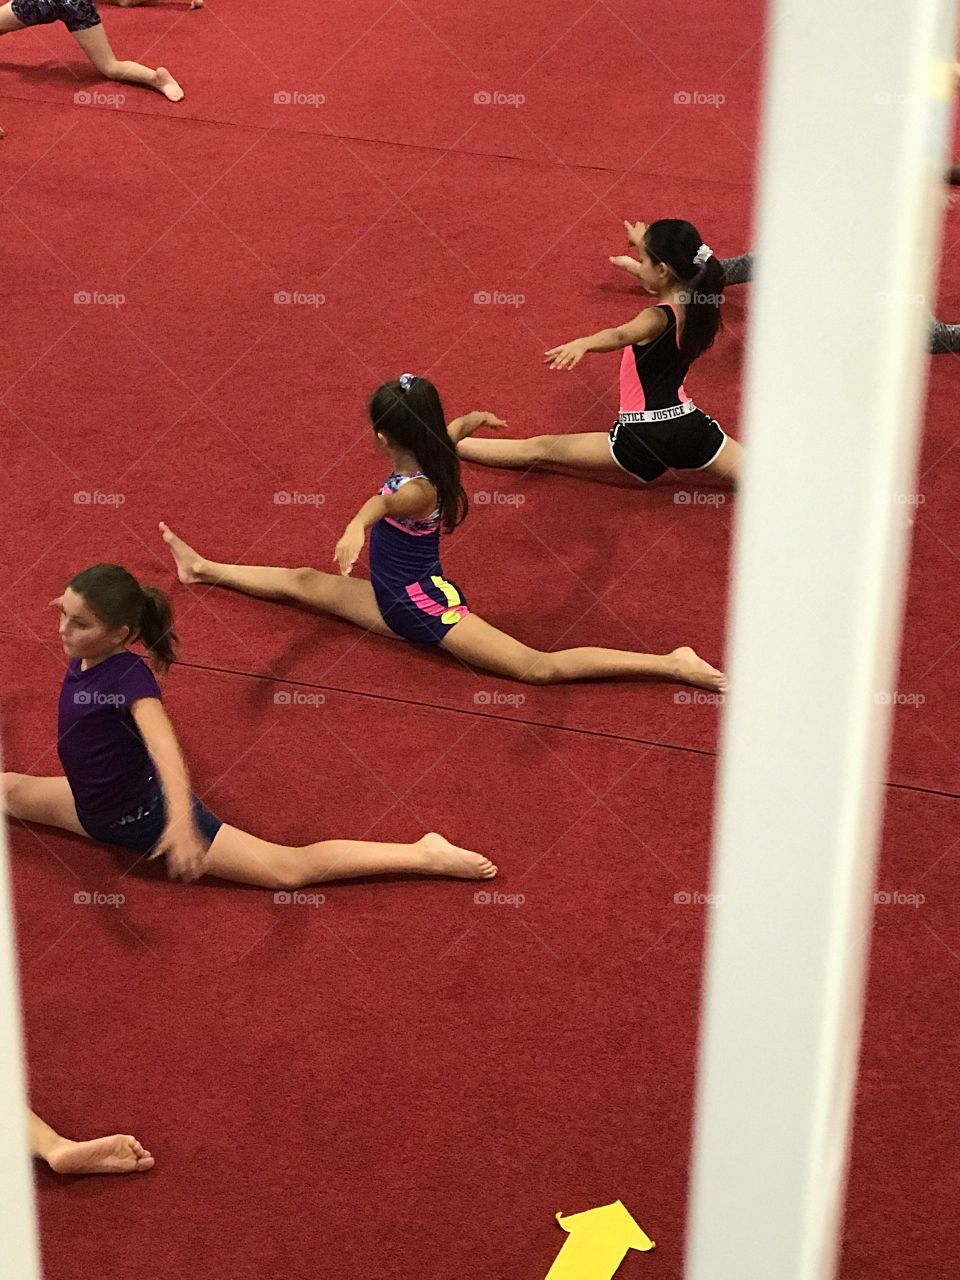 Ashley at gymnastics. She’s the one in the middle. 10 years old.